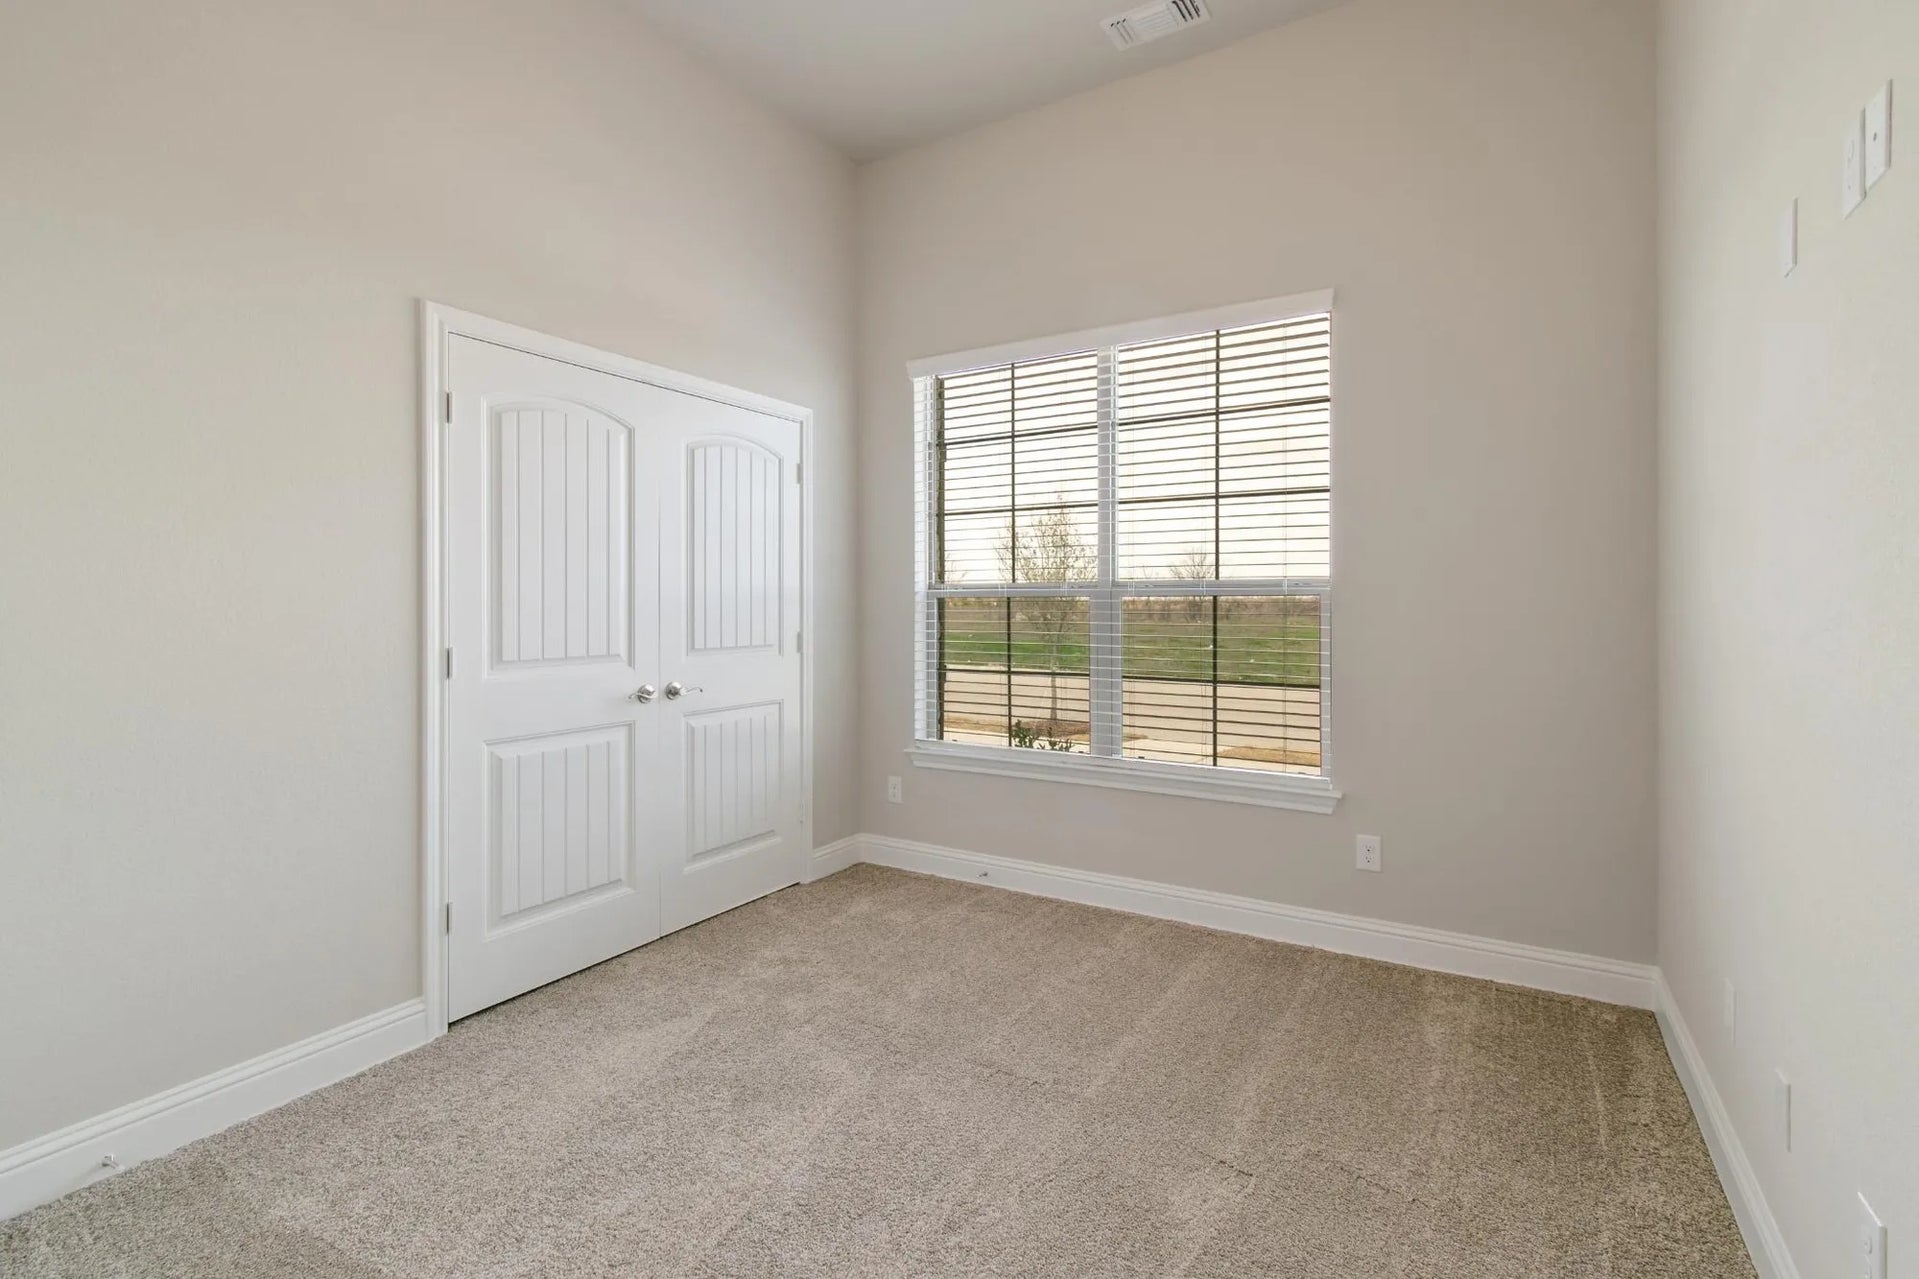 4br New Home in Heartland, TX